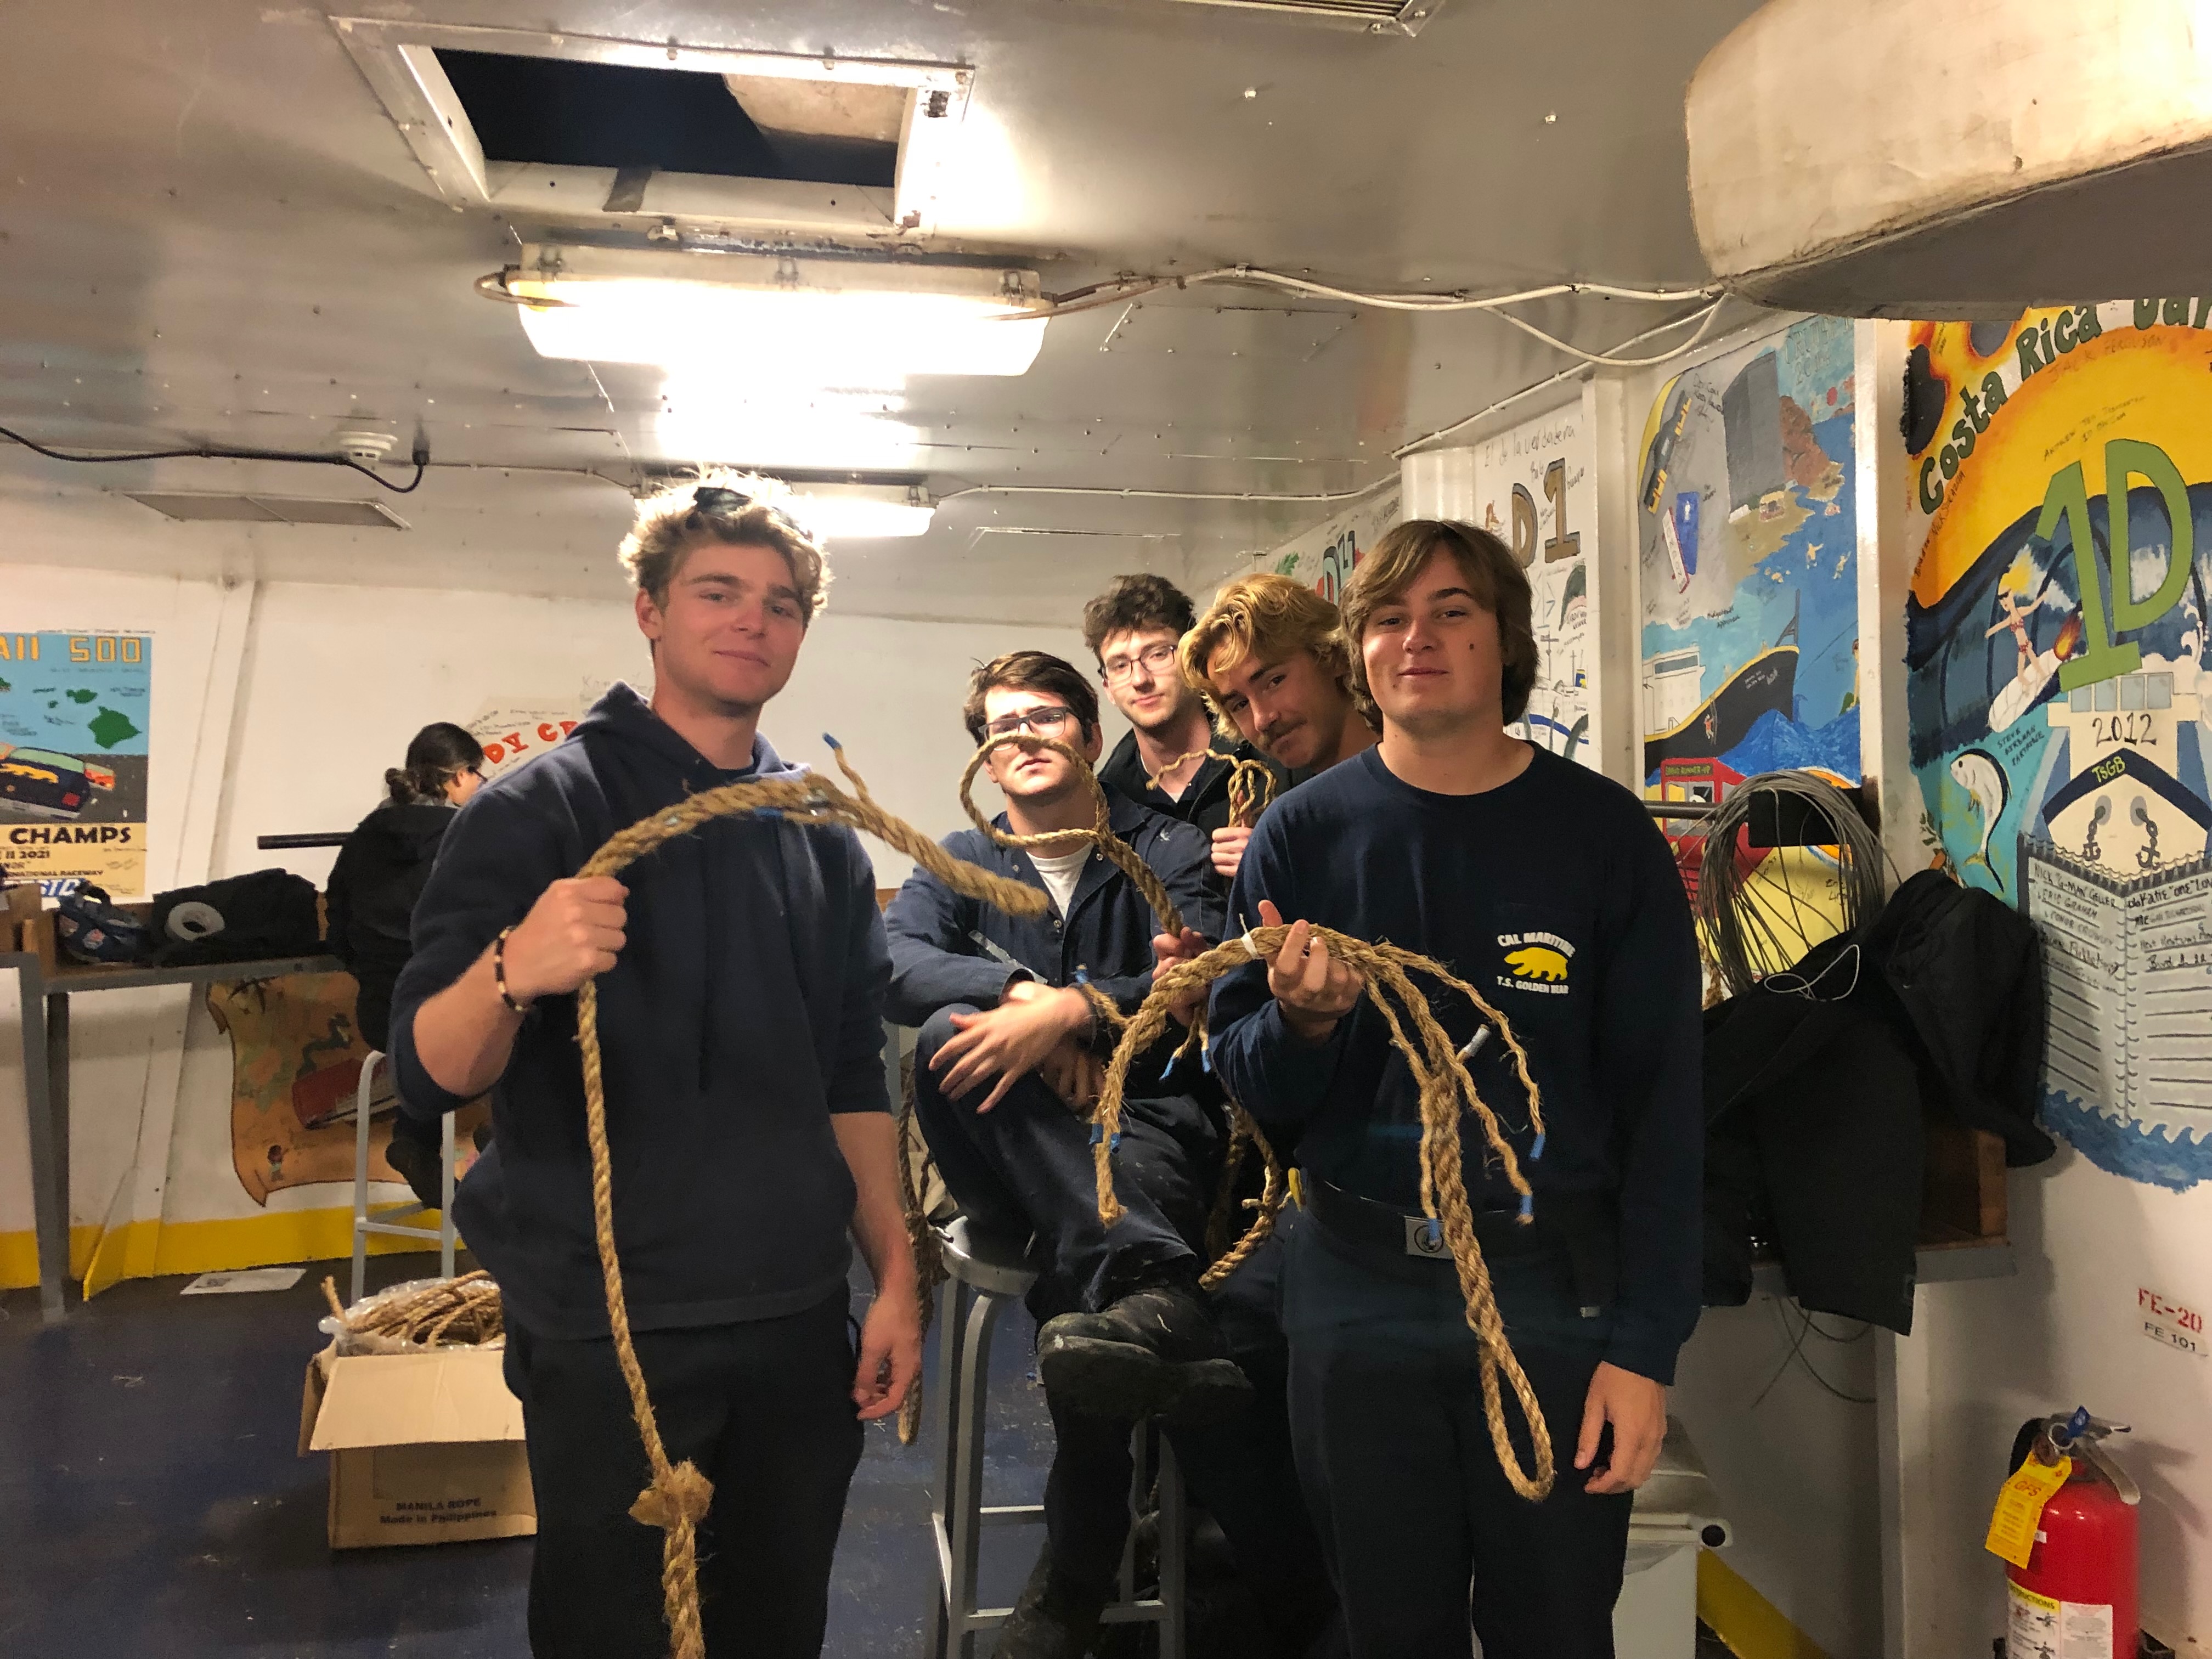 Cadets help one another with splicing line